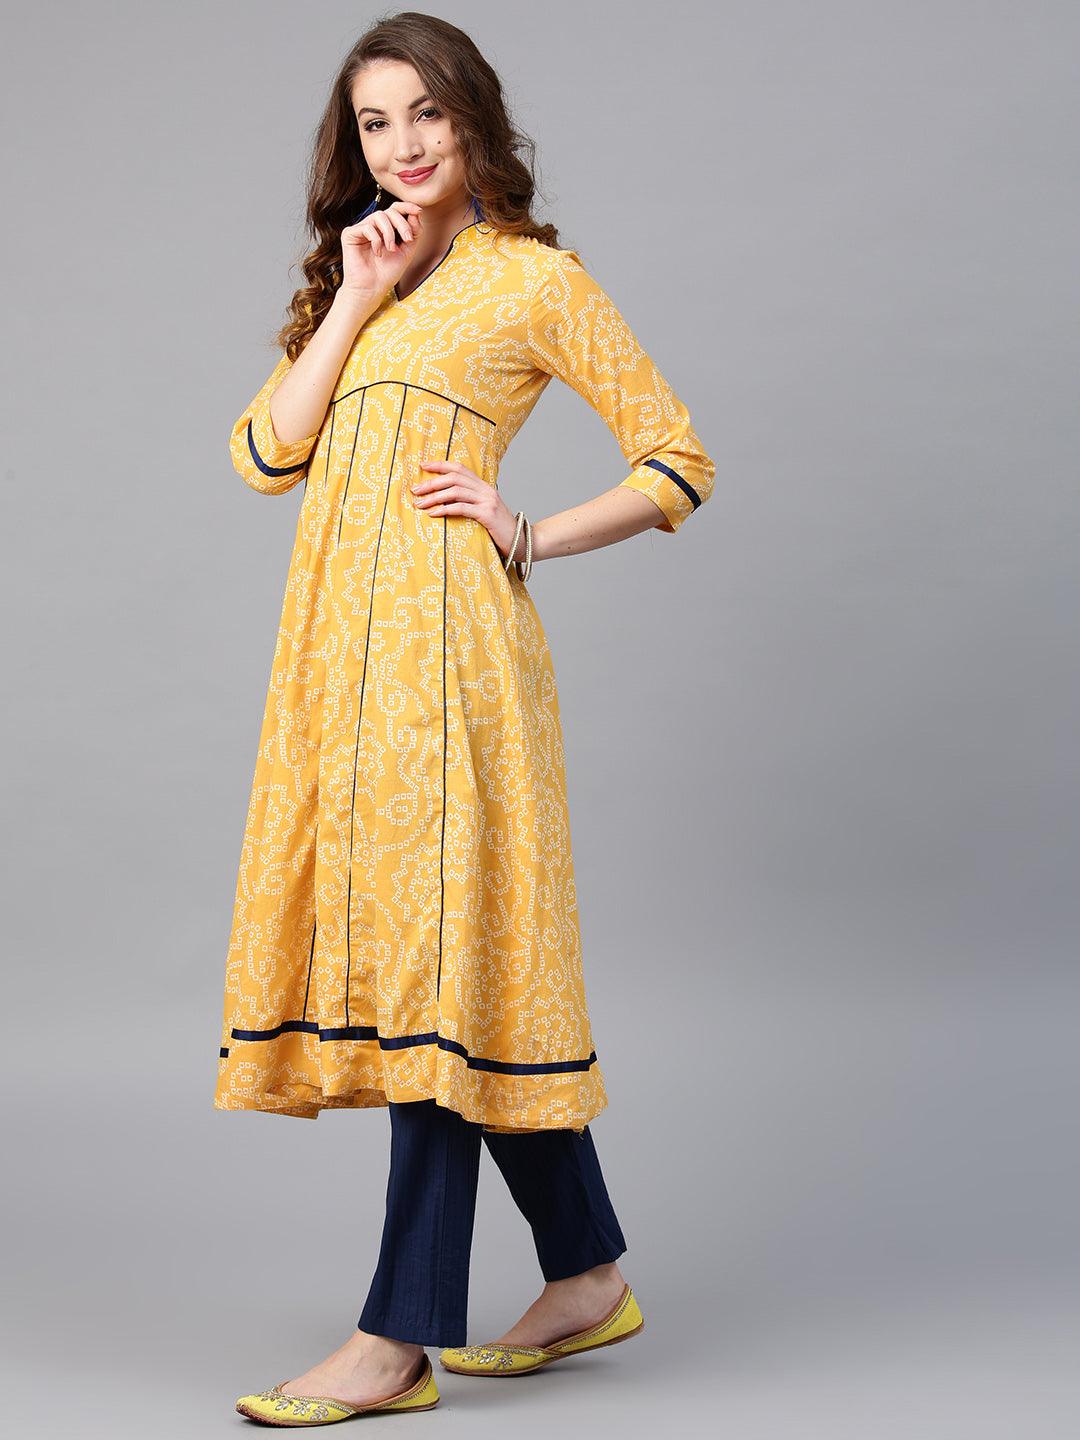 Yellow Bandhani Printed Anarkali With Blue Pipping Details (Fully Stitched) - Znxclothing